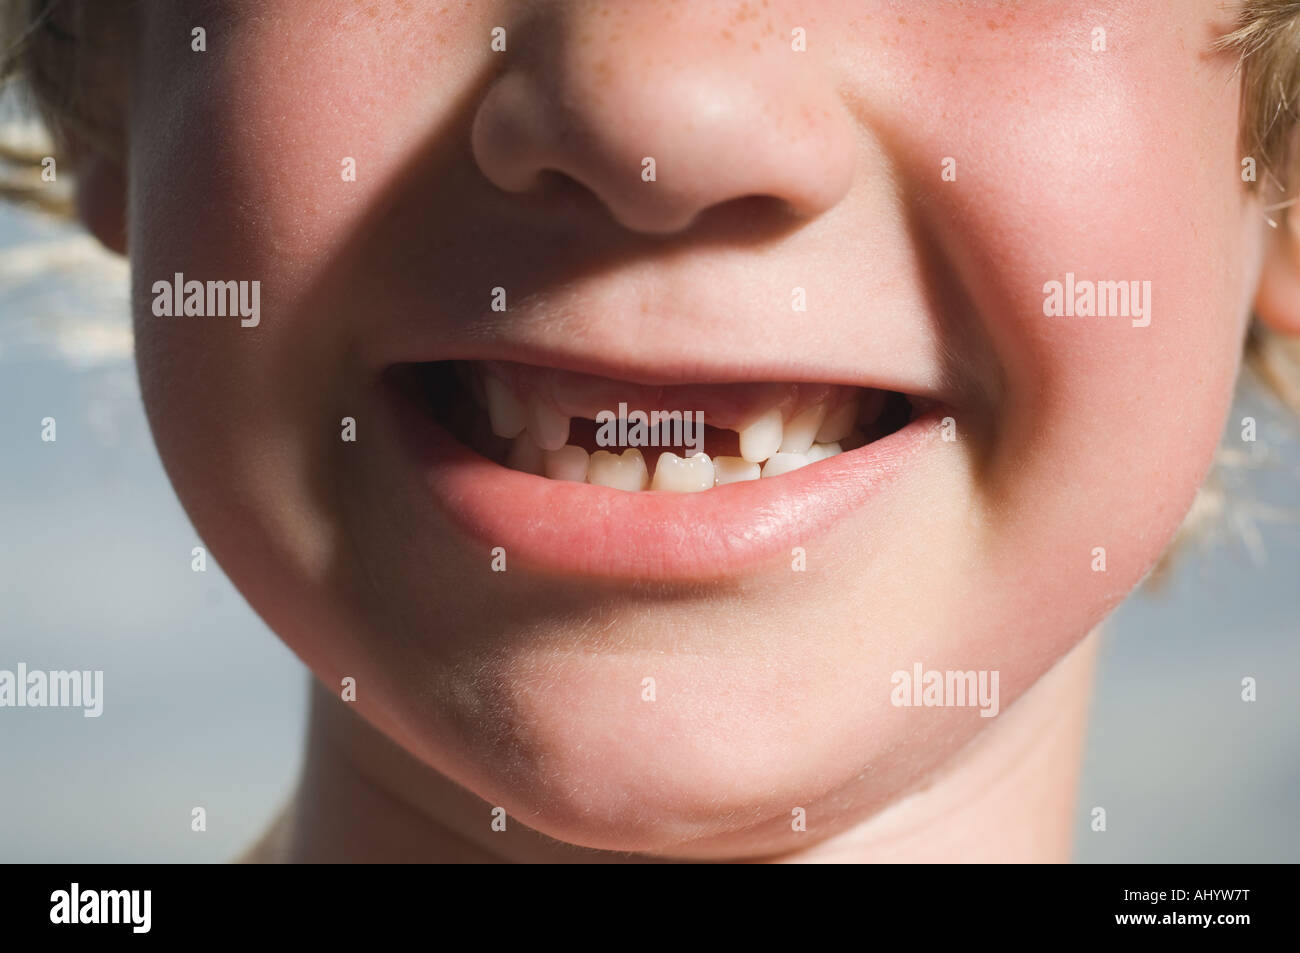 Boy with missing teeth smiling Stock Photo